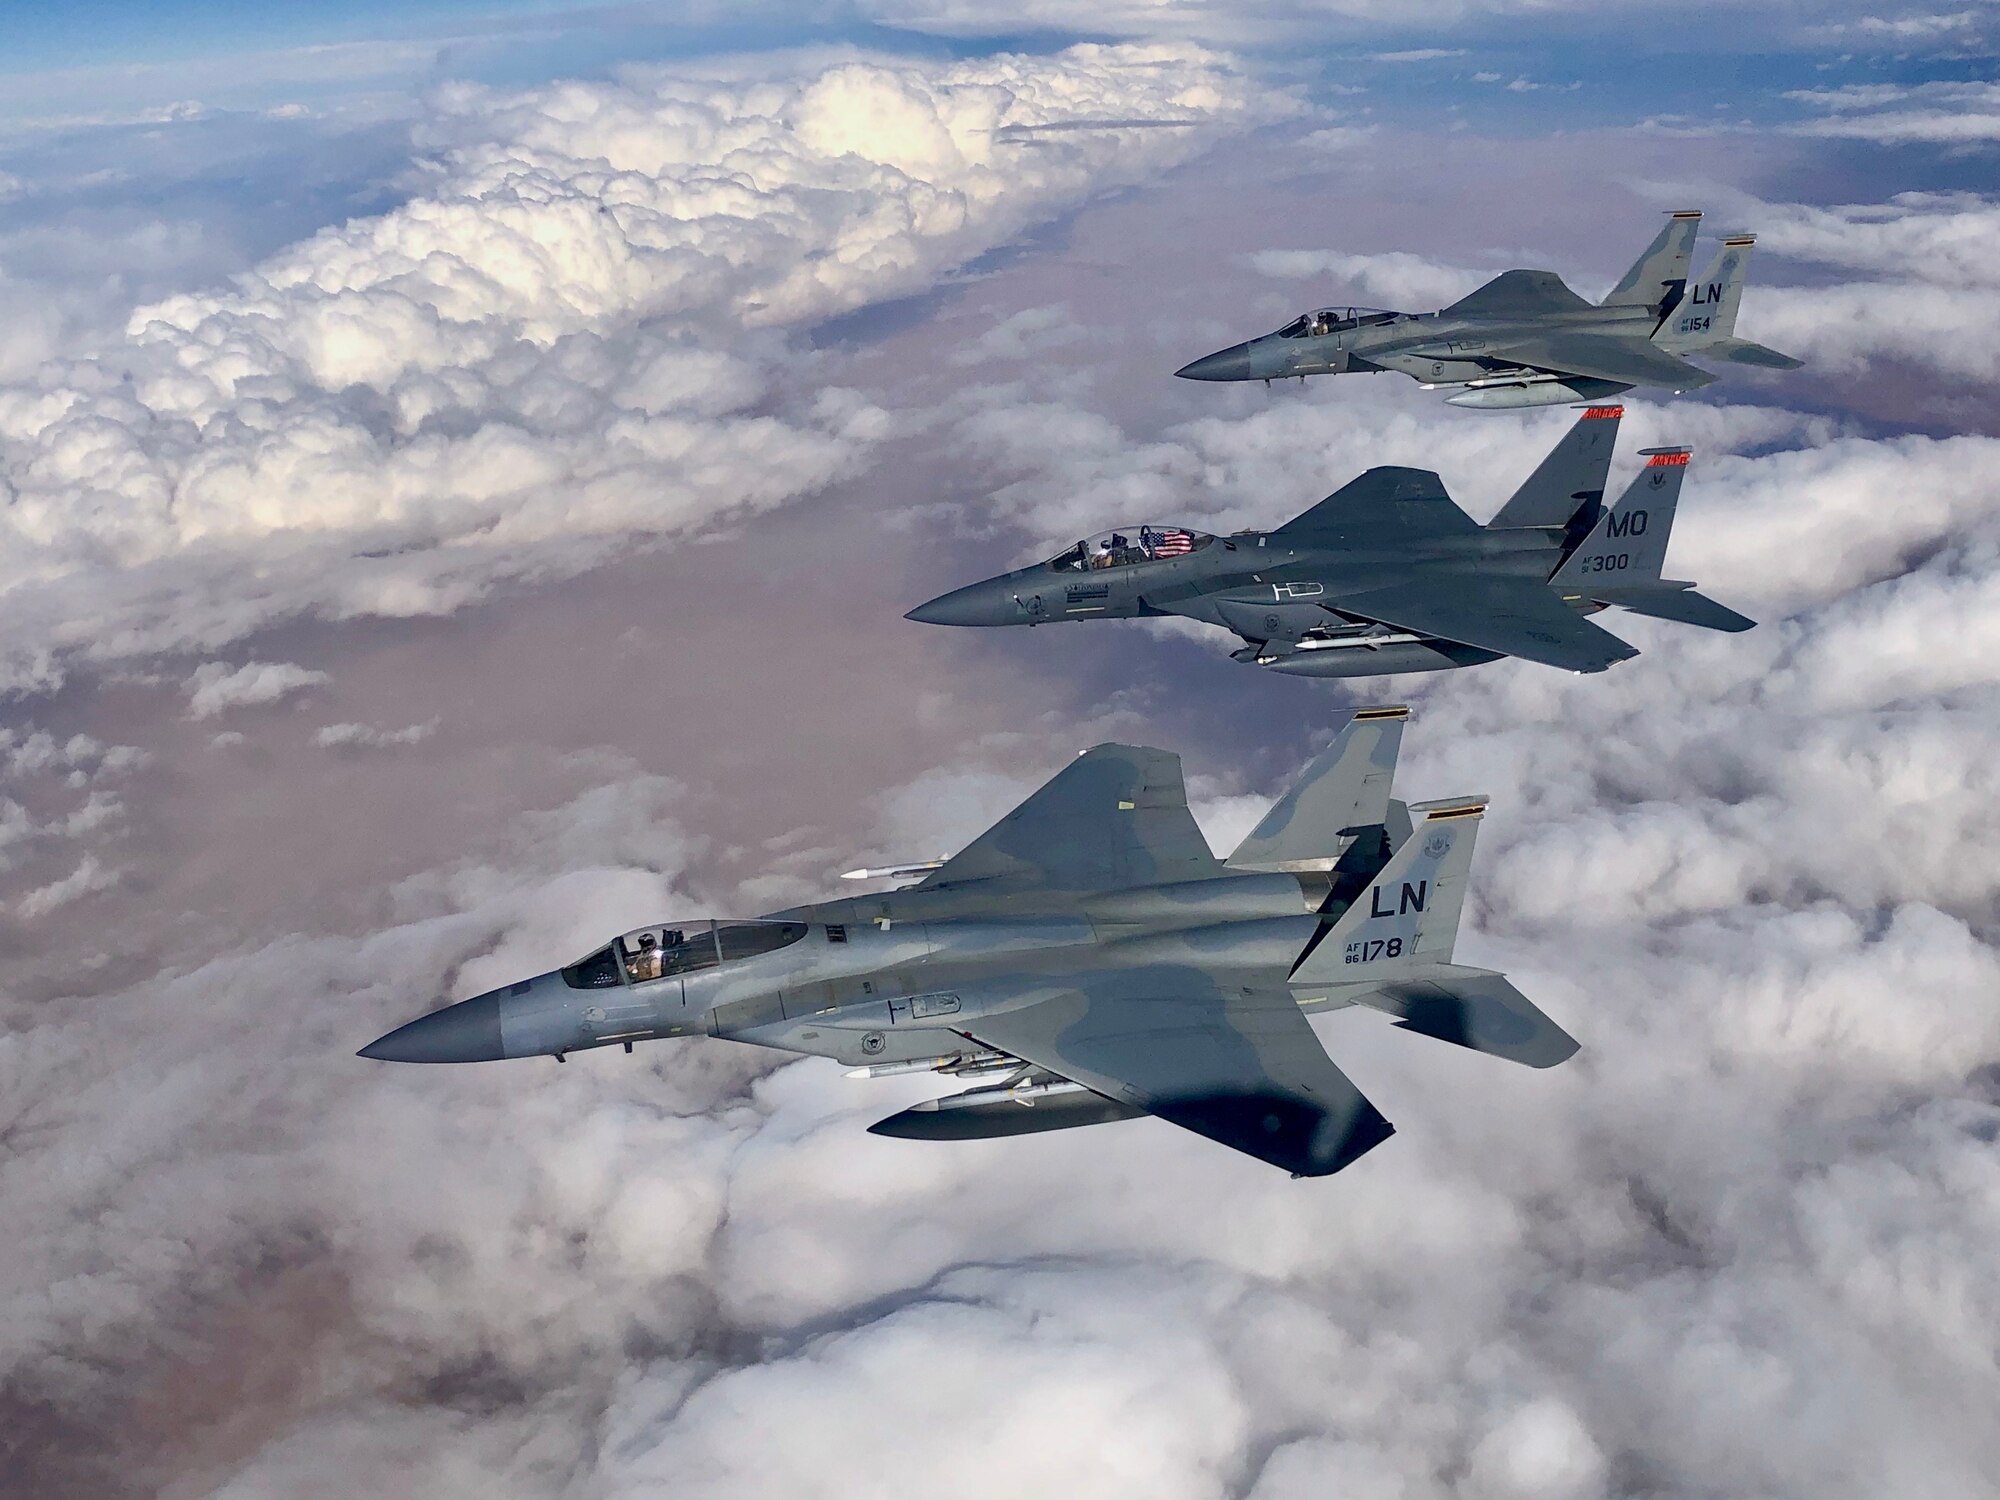 F-15C Eagles and an F-15E Strike Eagle fly over an undisclosed location in Southeast Asia in honor of the 493rd Fighter Squadron assumption of command for incoming commander Lt. Col. Anthony May during a mission supporting ongoing theater operations, February 28, 2019. The 493rd is a combat-ready squadron capable of executing air superiority and air defense missions in support of United States Air Forces in Europe, United States European Command, and NATO operations. (Courtesy photo)